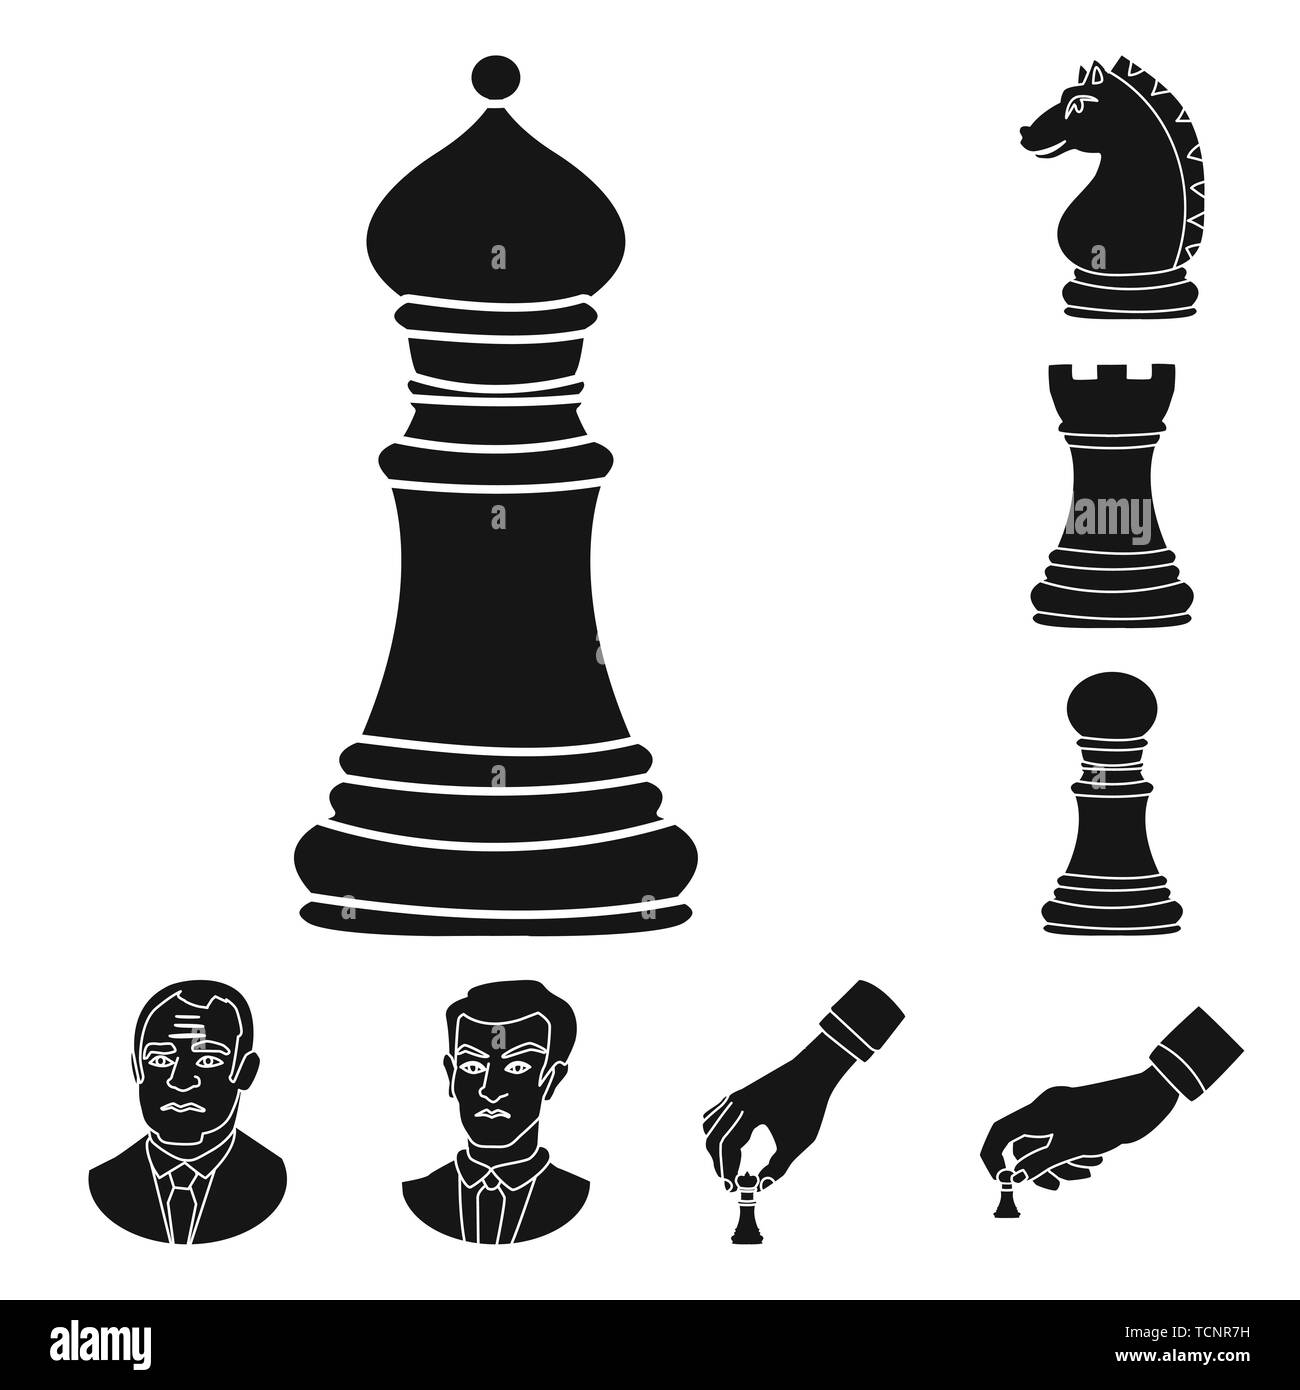 bishop,knight,rook,pawn,man,hand,strategic,horse,board,face,businessman,king,championship,castle,white,person,profile,concept,tower,figure,hair,business,check,head,network,counter,portrait,move,club,target,chess,game,piece,strategy,tactical,play,checkmate,thin,set,vector,icon,illustration,isolated,collection,design,element,graphic,sign,black,simple Vector Vectors , Stock Vector